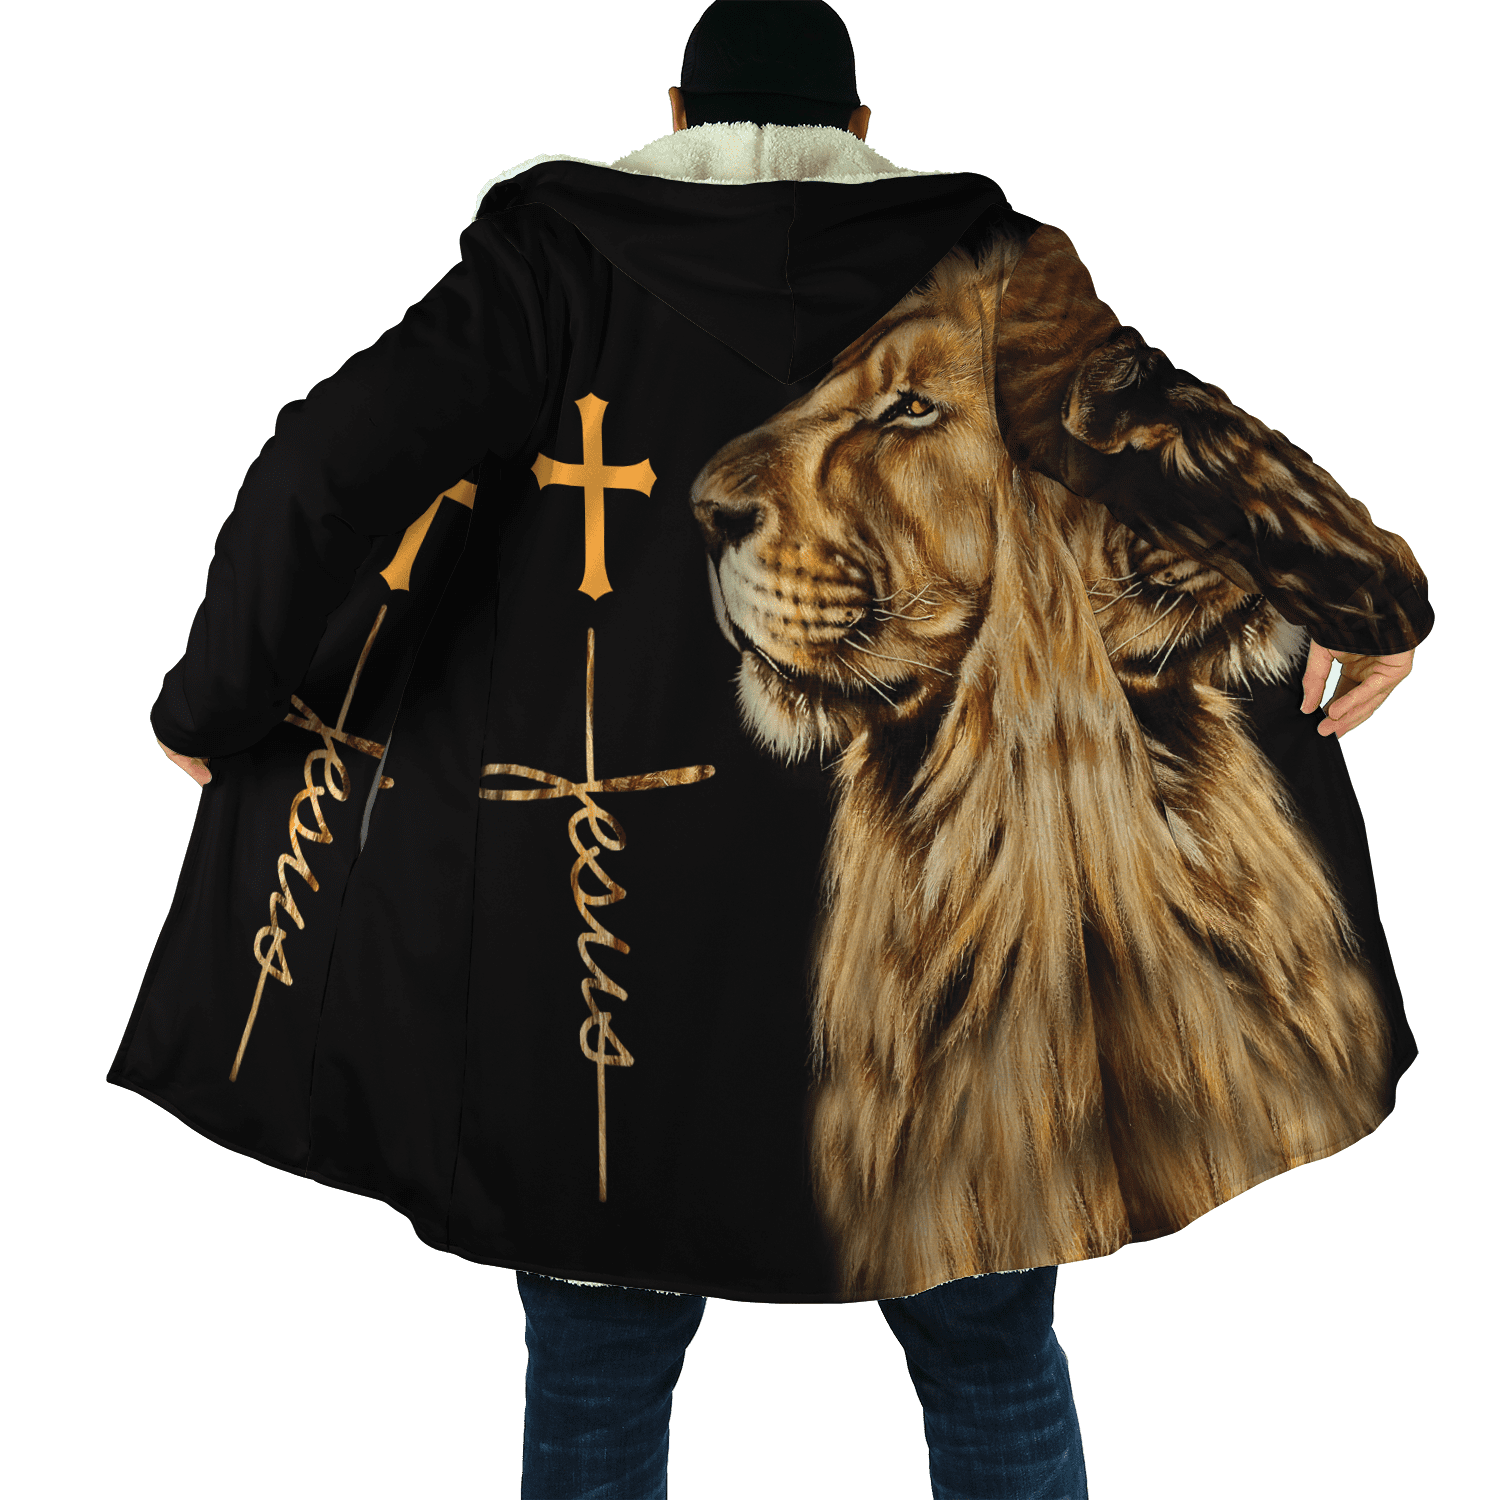 I Belong To Jesus 3D All Over Printed Unisex Shirts